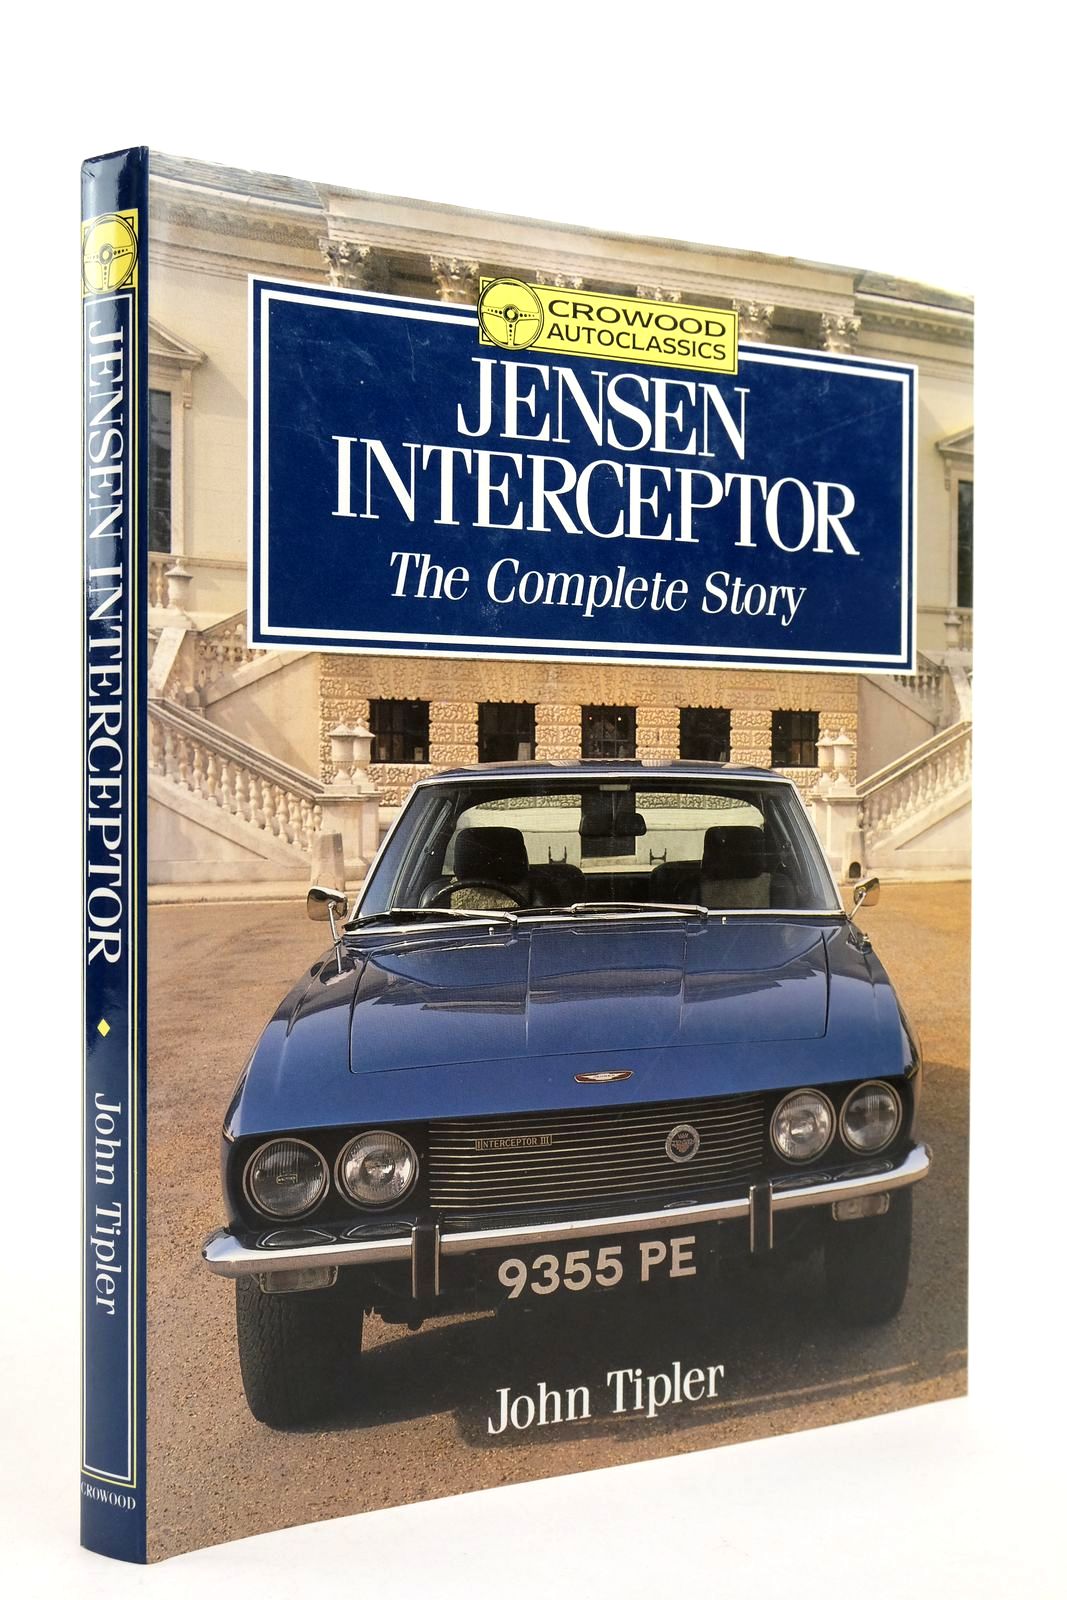 Photo of JENSEN INTERCEPTOR THE COMPLETE STORY written by Tipler, John published by The Crowood Press (STOCK CODE: 2139260)  for sale by Stella & Rose's Books